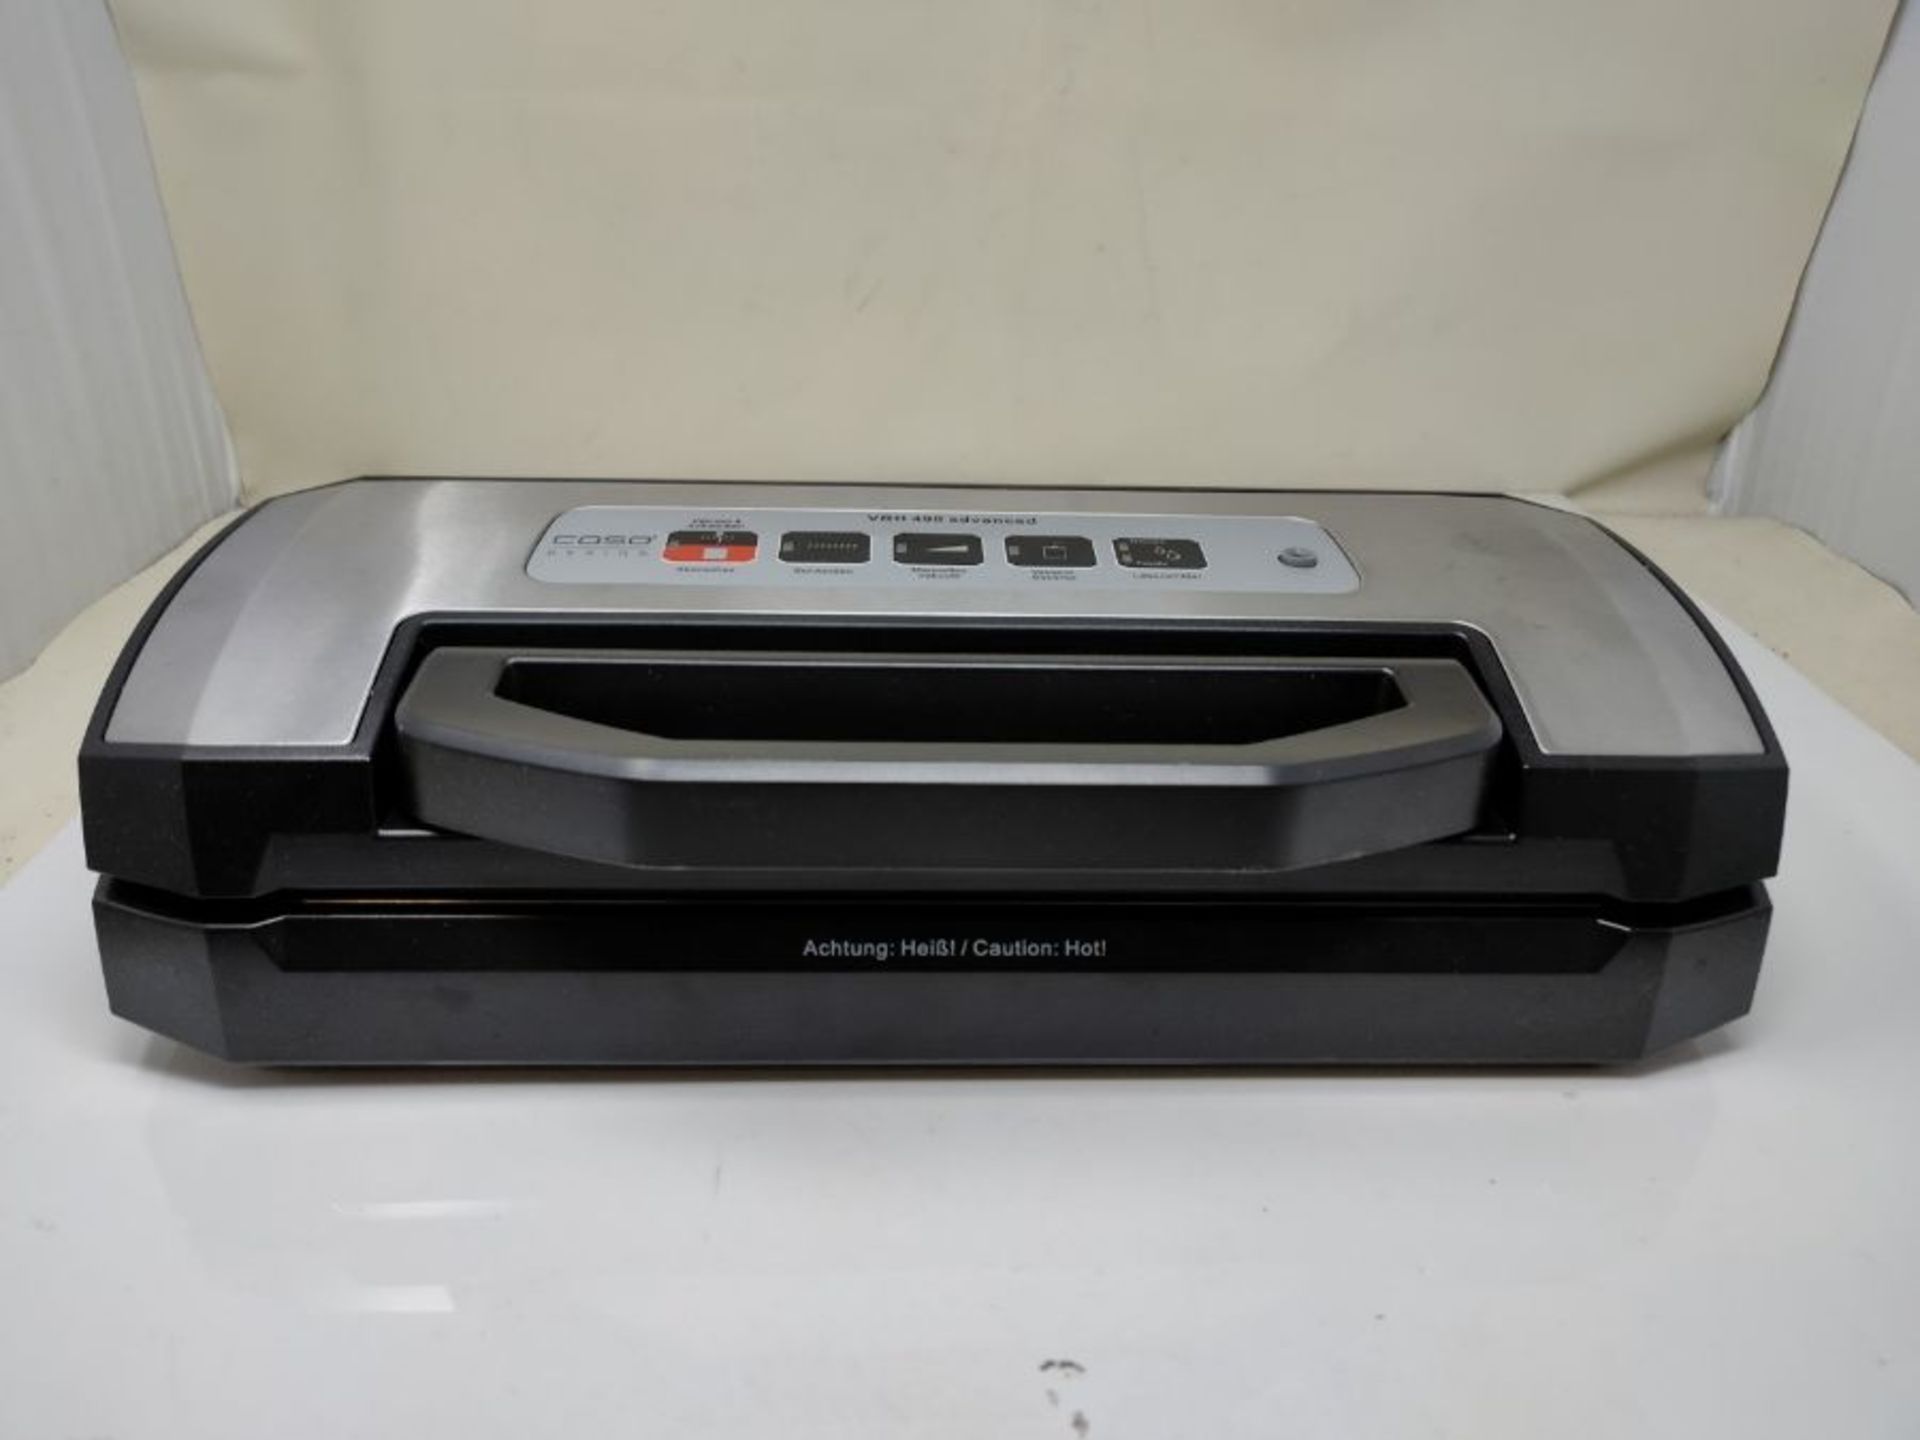 RRP £91.00 CASO Advanced Vacuum Sealer - Film Sealing Device - Extend the Shelf Life of Your Food - Image 3 of 3